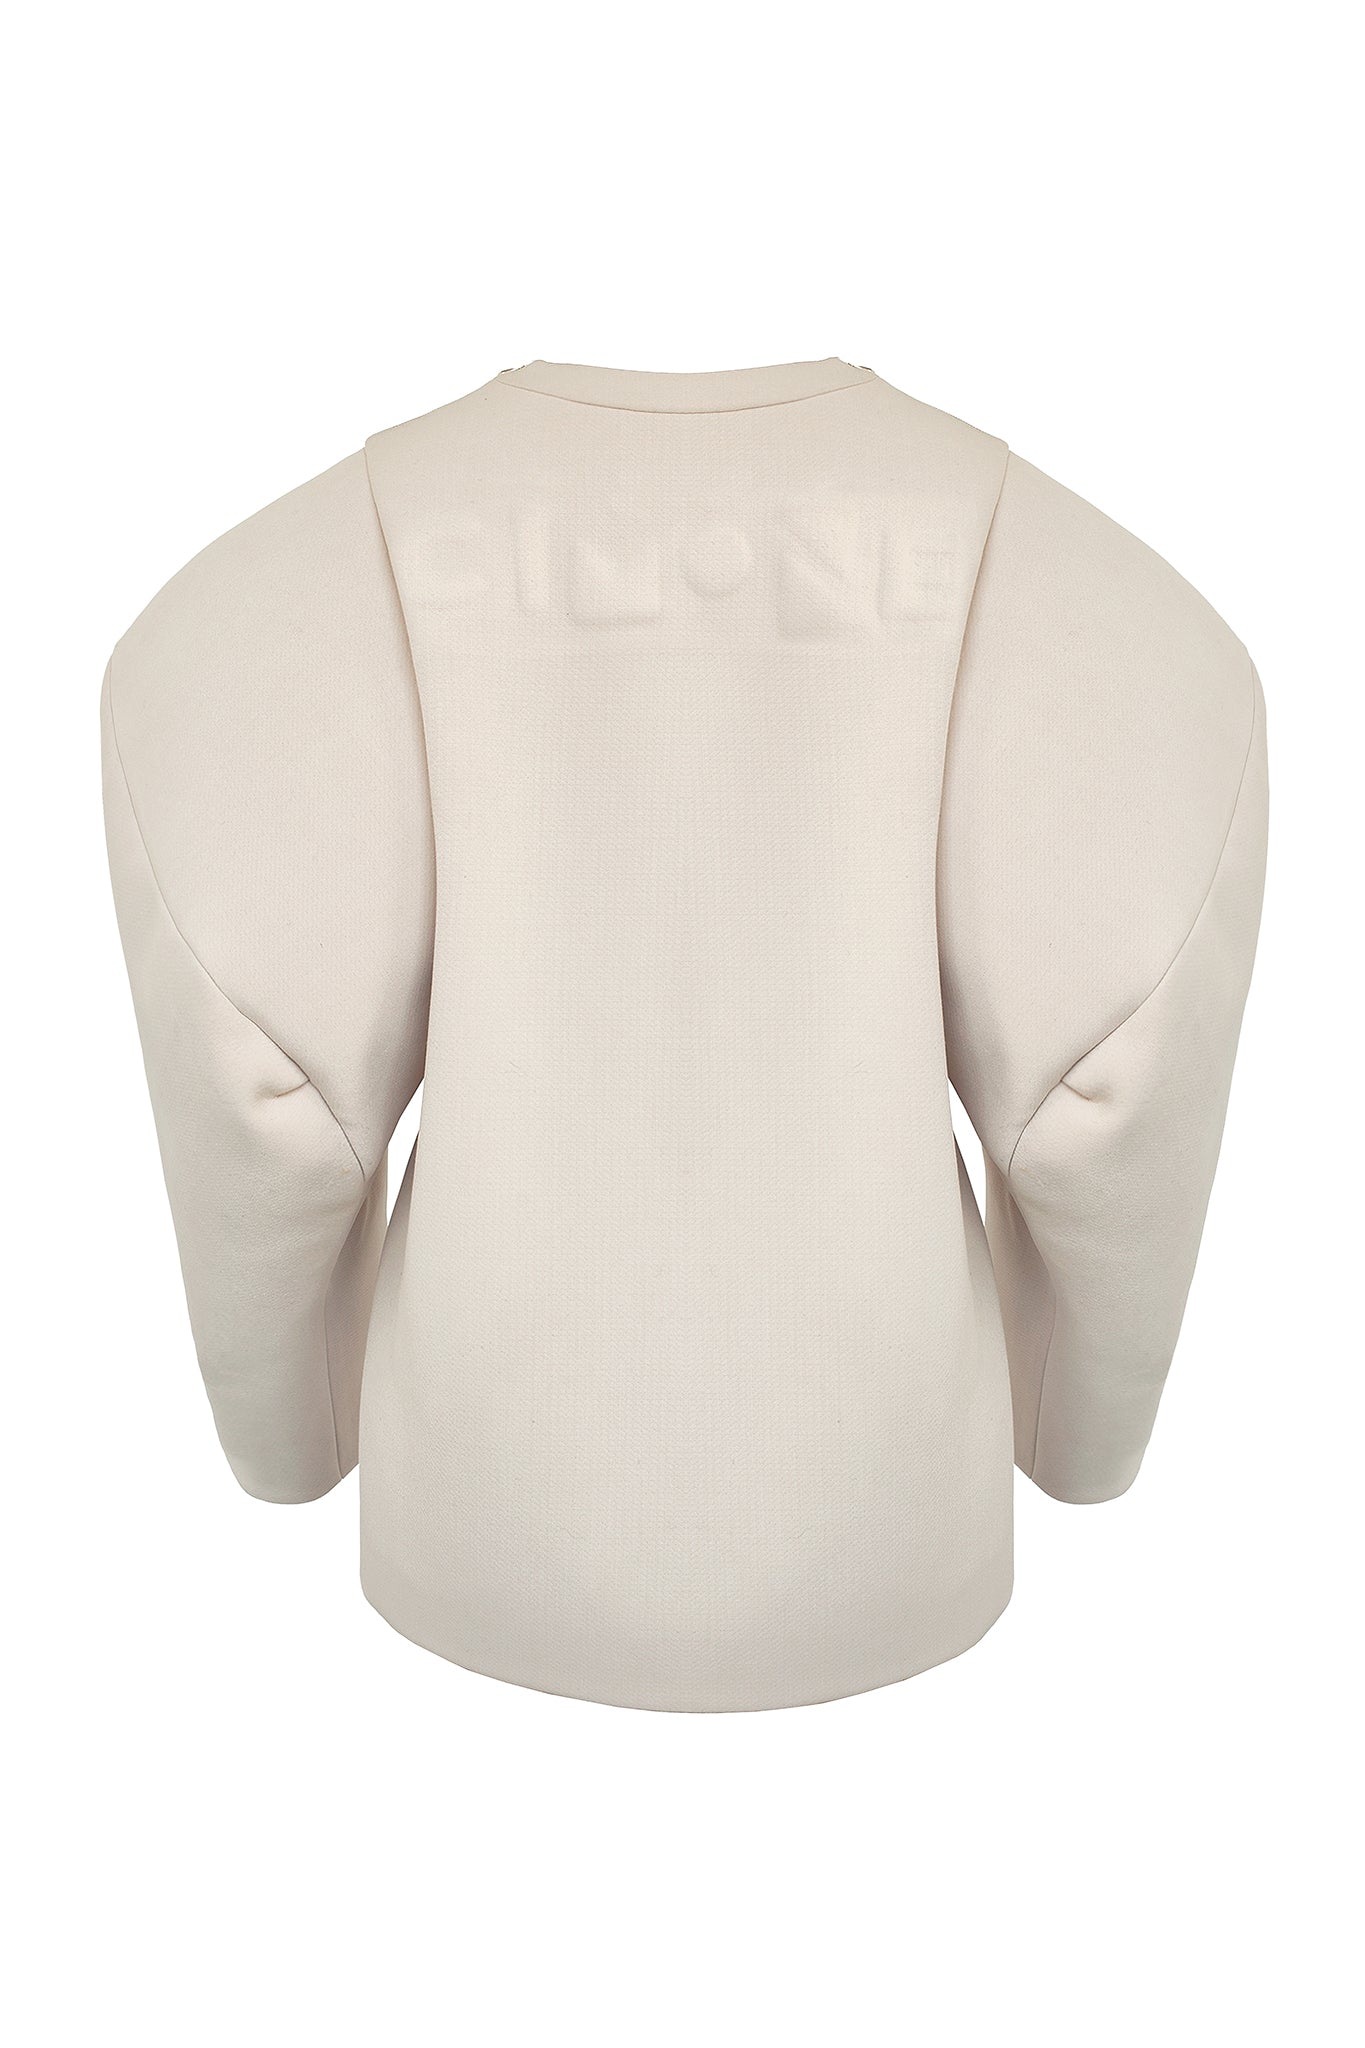 This casual sweatshirt-style top features gigantic exaggerated sleeves with an unusual dropped shoulder line. The colossal shoulders are enhanced by the clean nature of the body, and share the same sleeve construction as the “Extra” coat. The sleeves have been bonded in self, to give them a little more body and sumptuousness.  To close there is a zip in each of the shoulders. The inside is clean with bound seams to finish.  